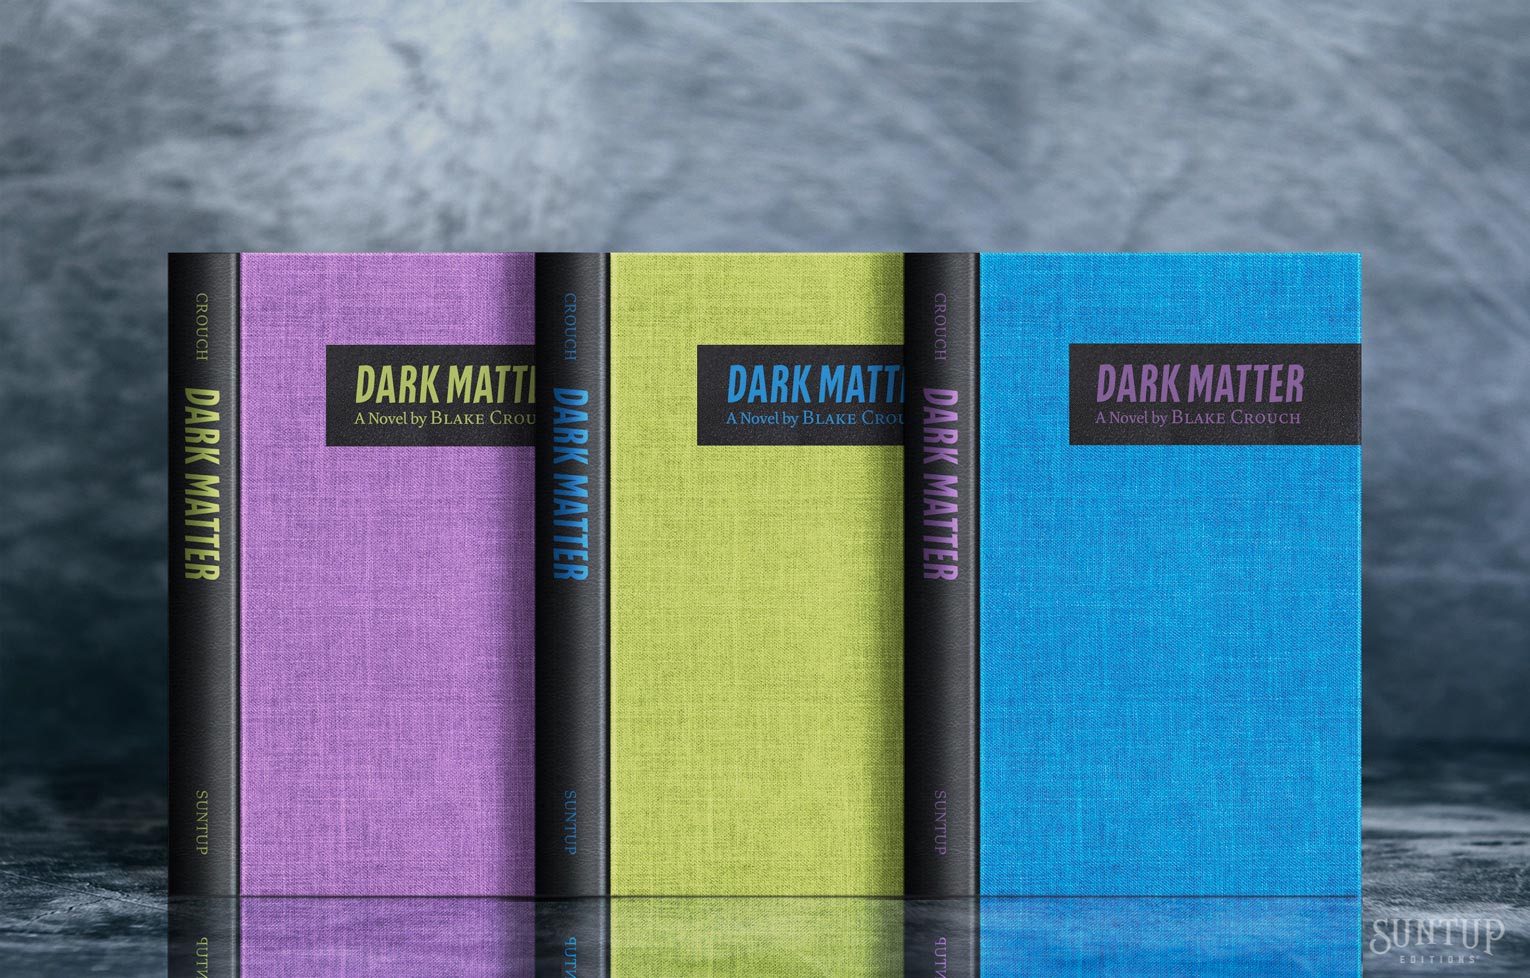 Dark Matter by Blake Crouch Signed & Numbered Hardcover (PREORDER)